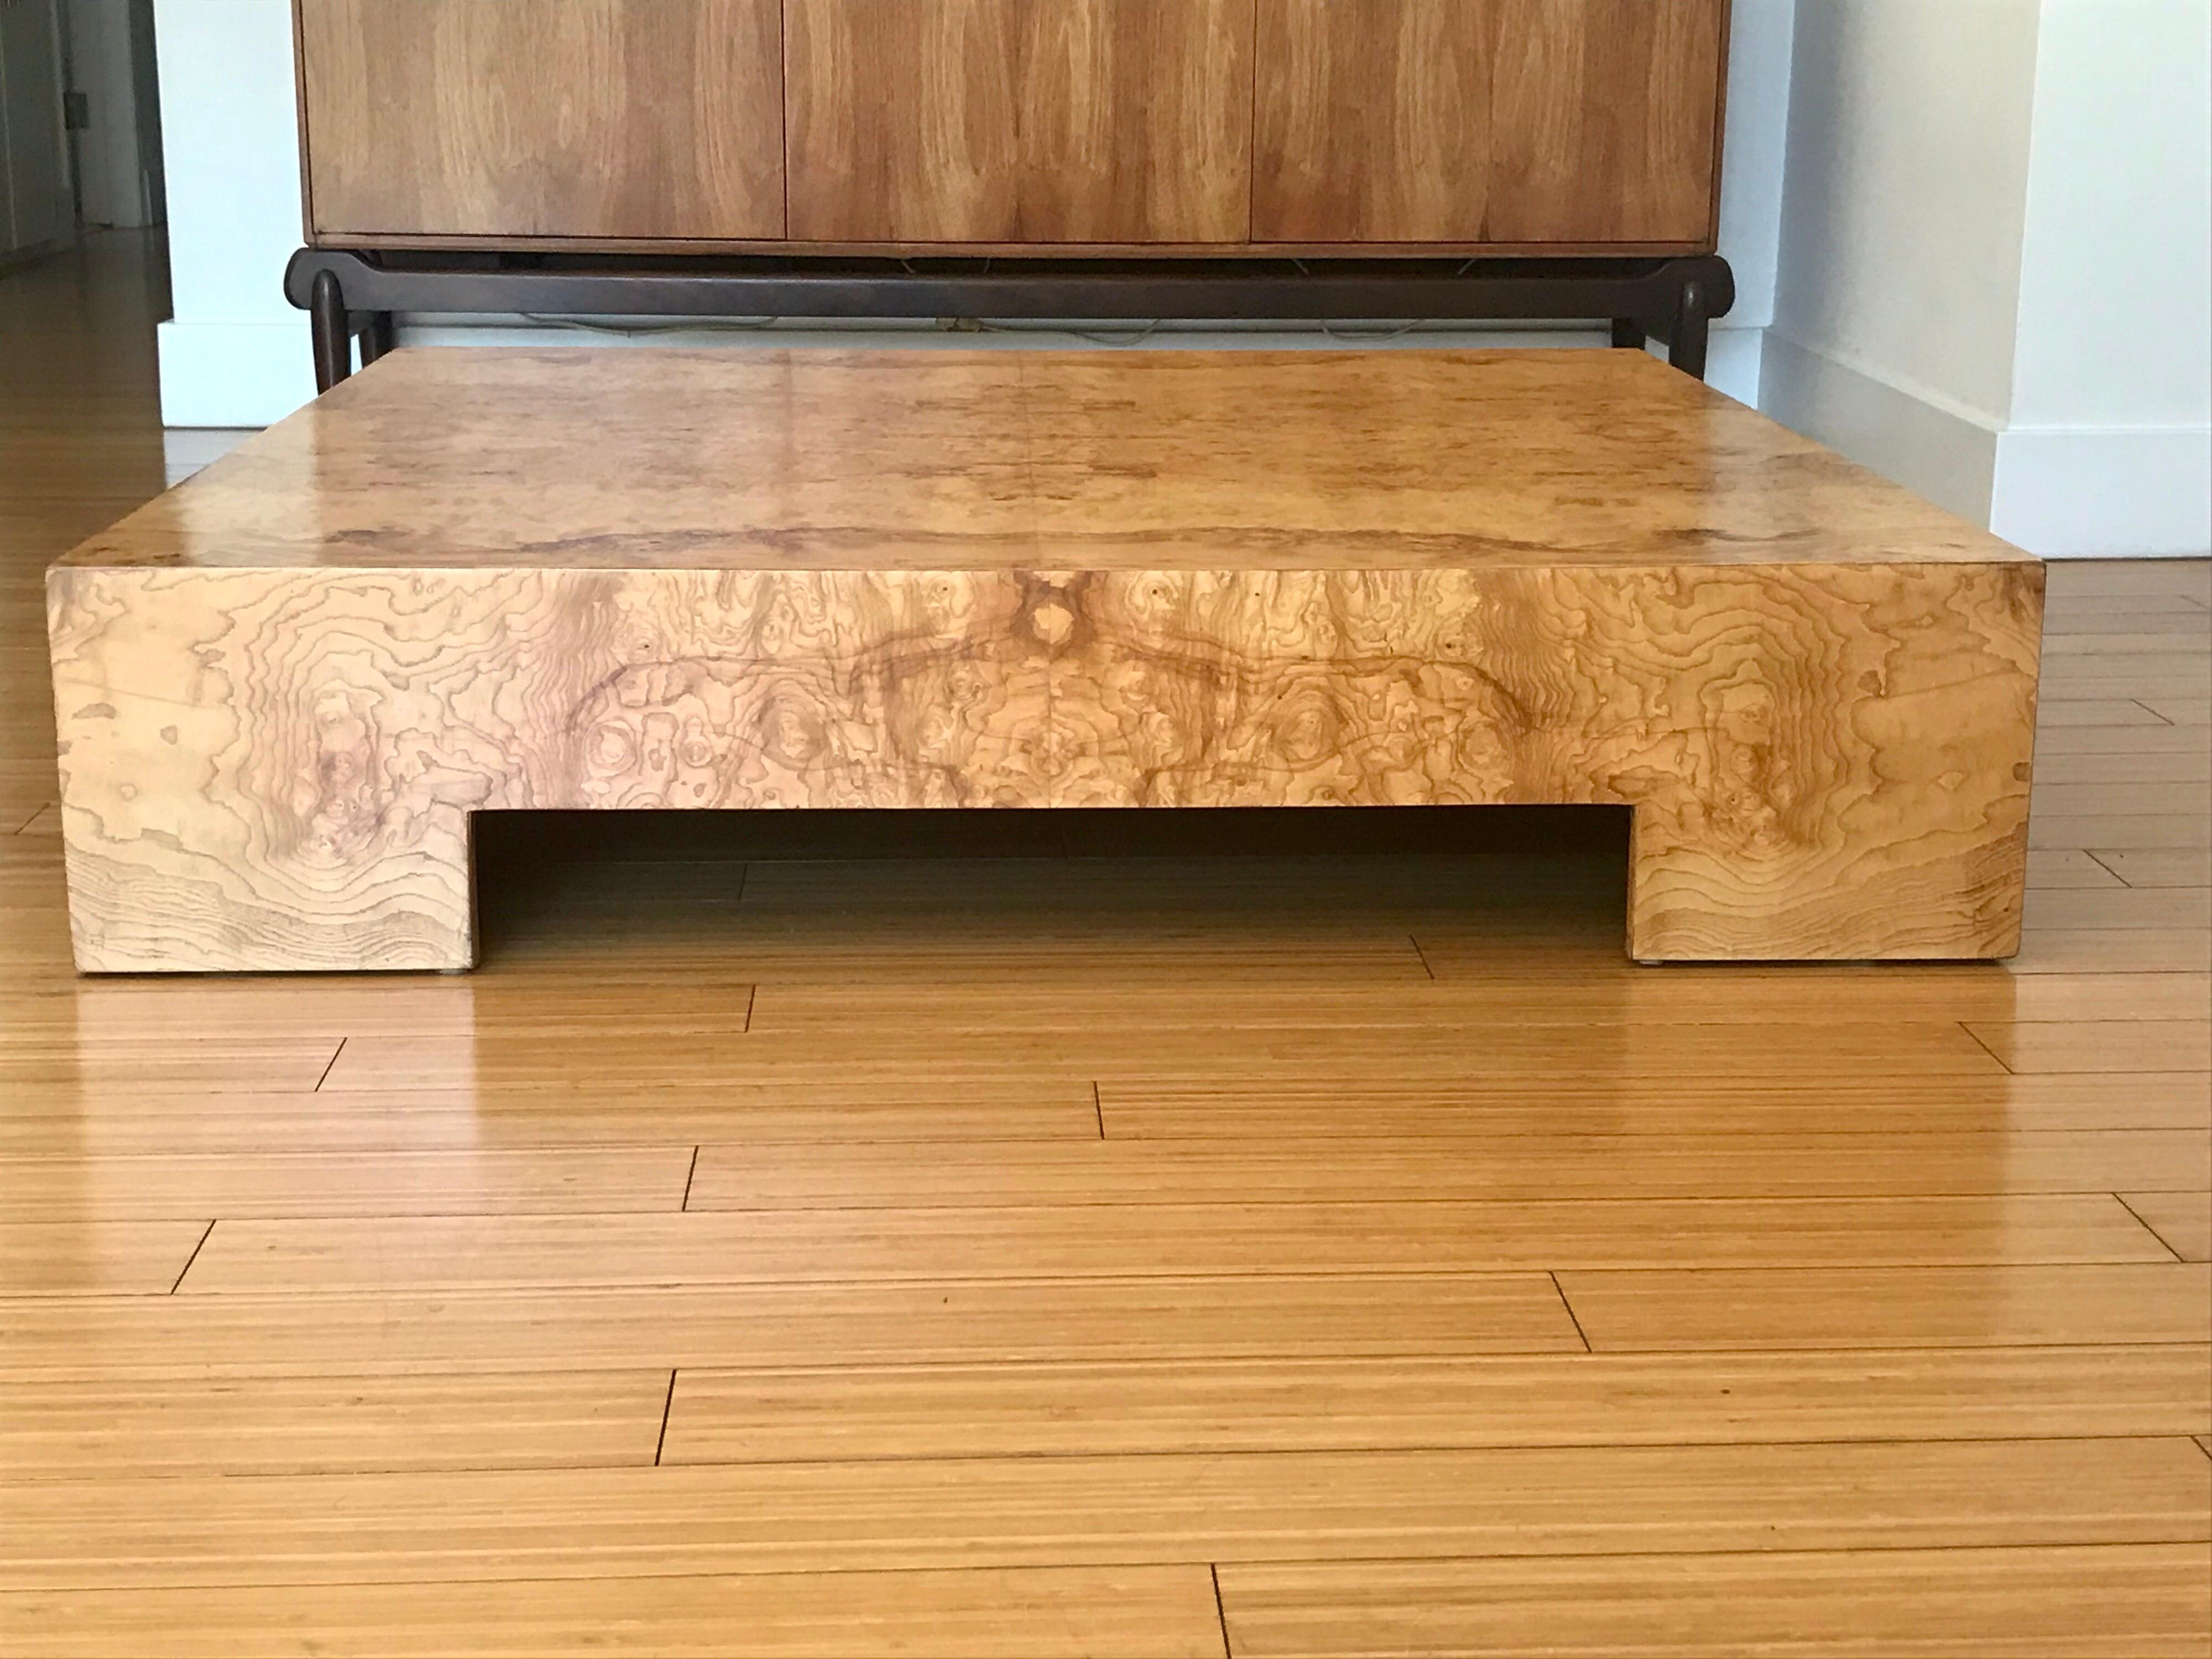 Laminated Large and Low Architectural Coffee Table